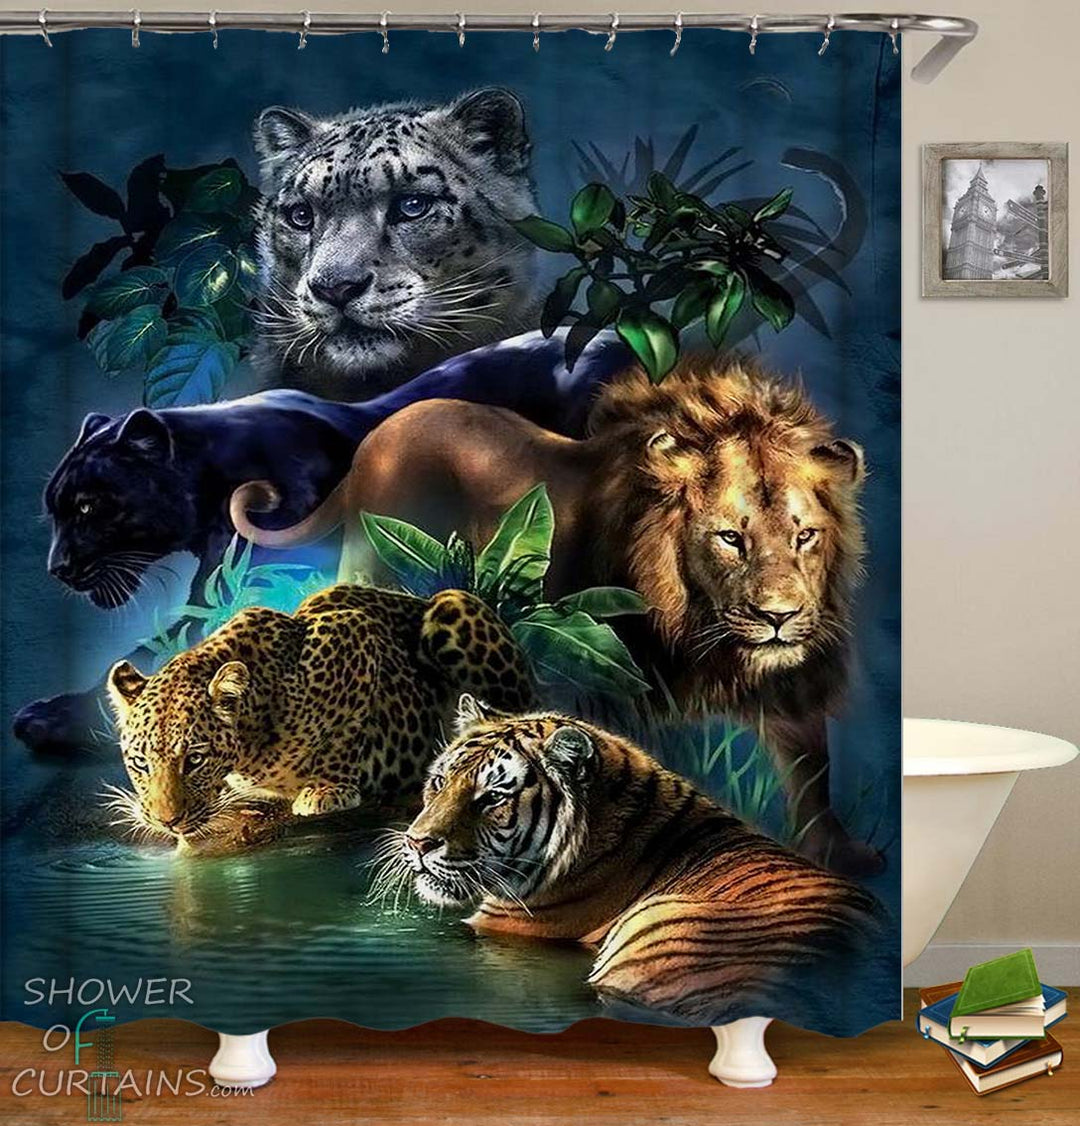 Shower Curtain of the Five Big Cats